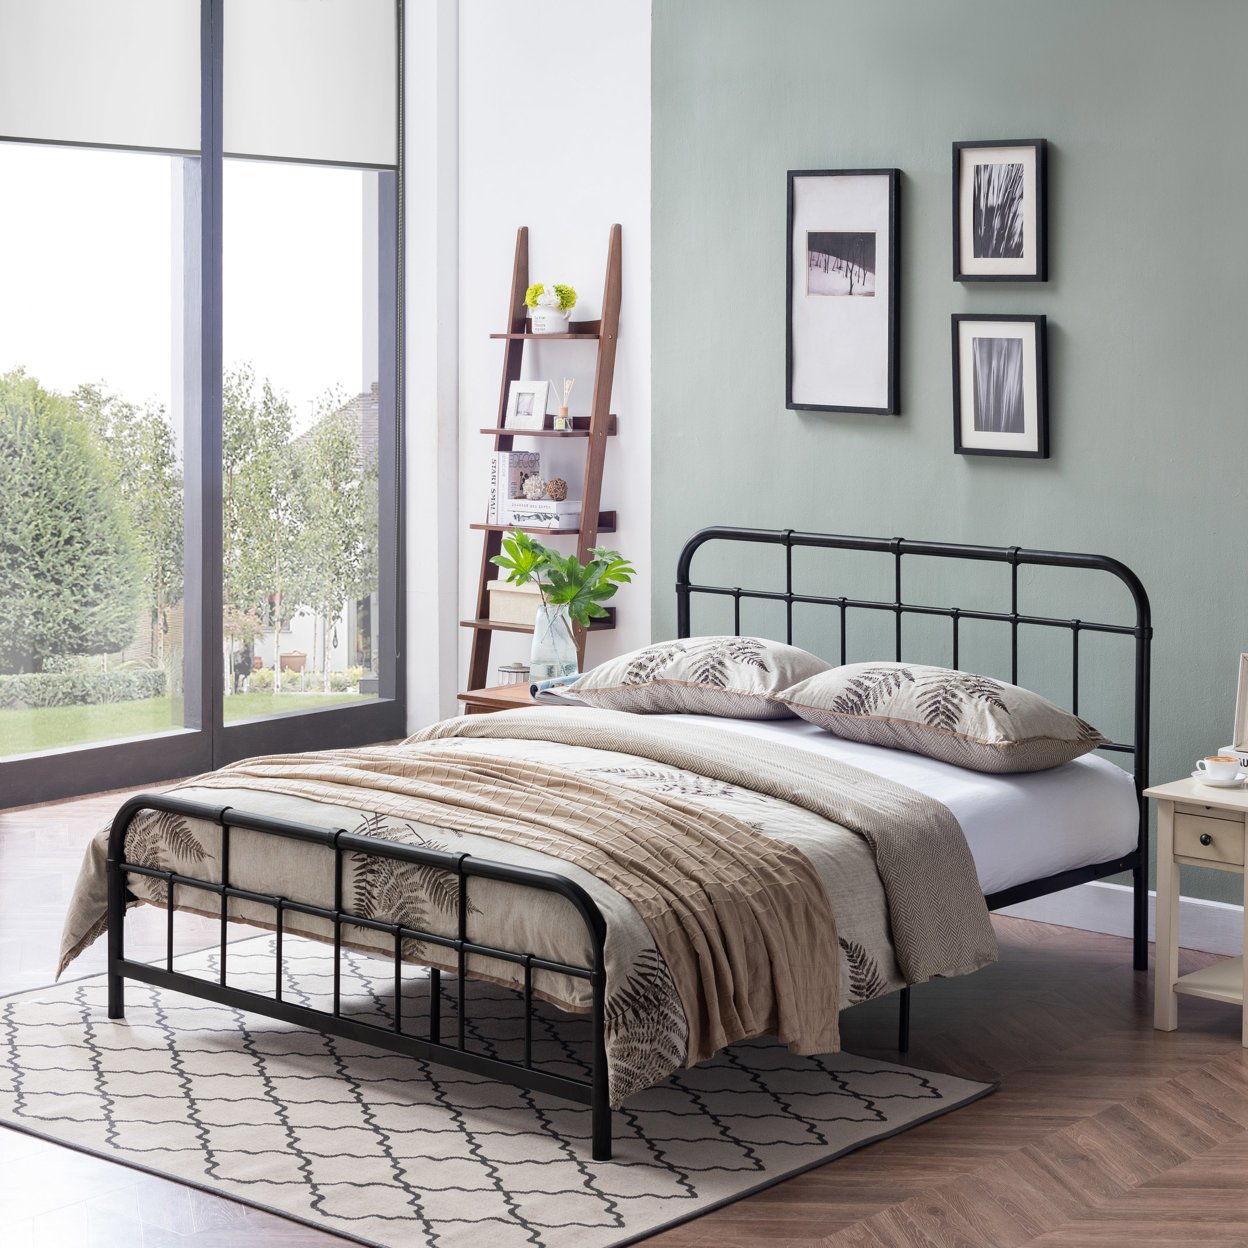 Sylvia Queen-Size Iron Bed Frame, Minimal, Industrial - Black